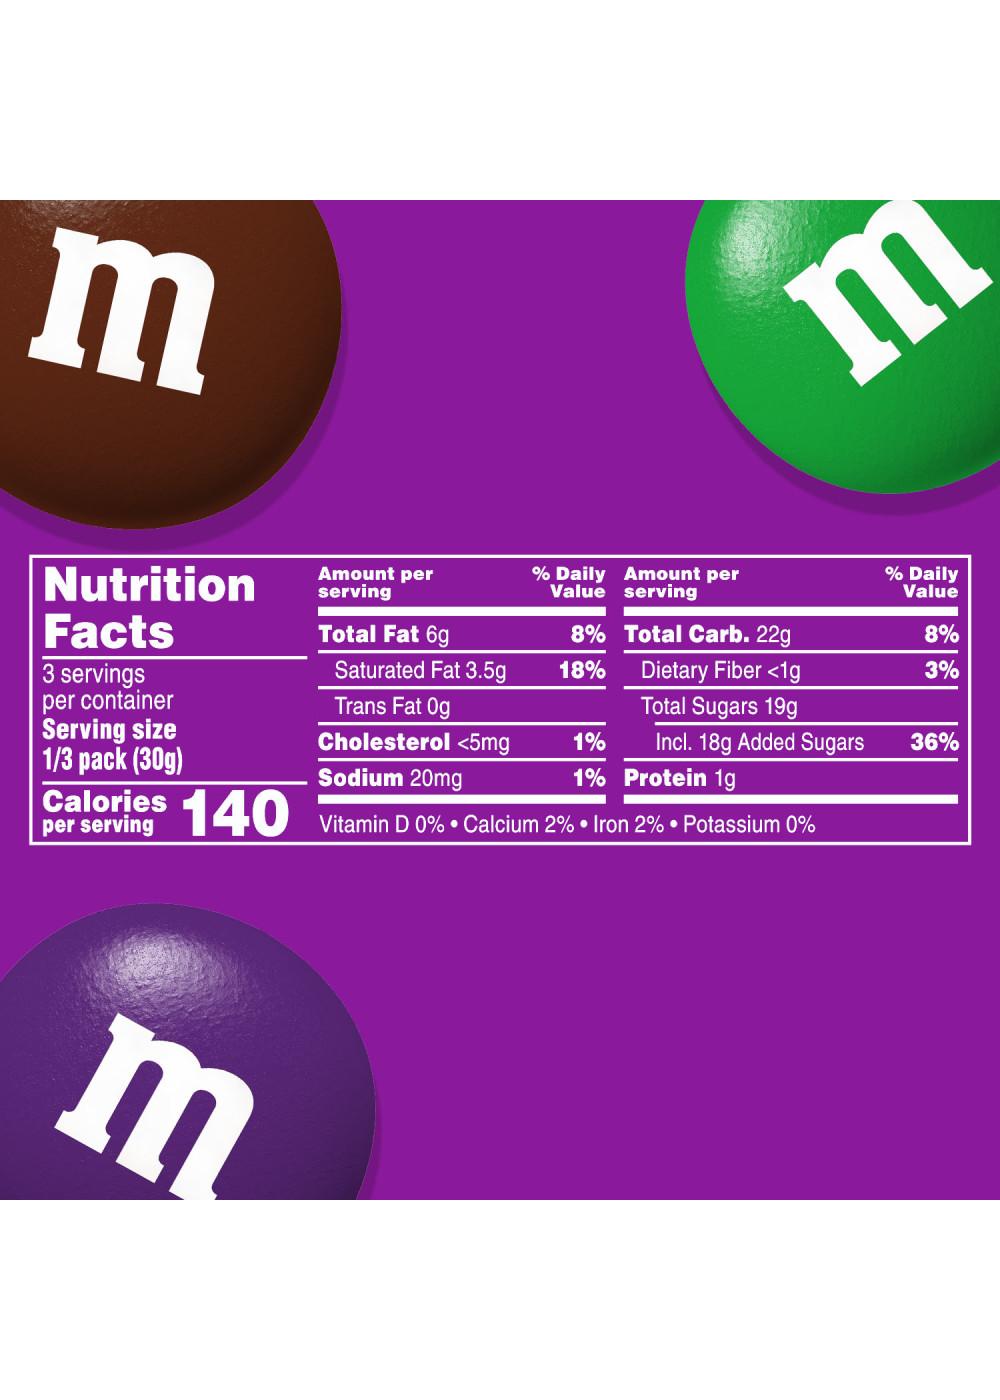 M&M's Limited Edition Peanut Butter Milk Chocolate Candy Featuring Purple  Candy, Share Size, 2.83 Oz Bag, Chocolate Candy